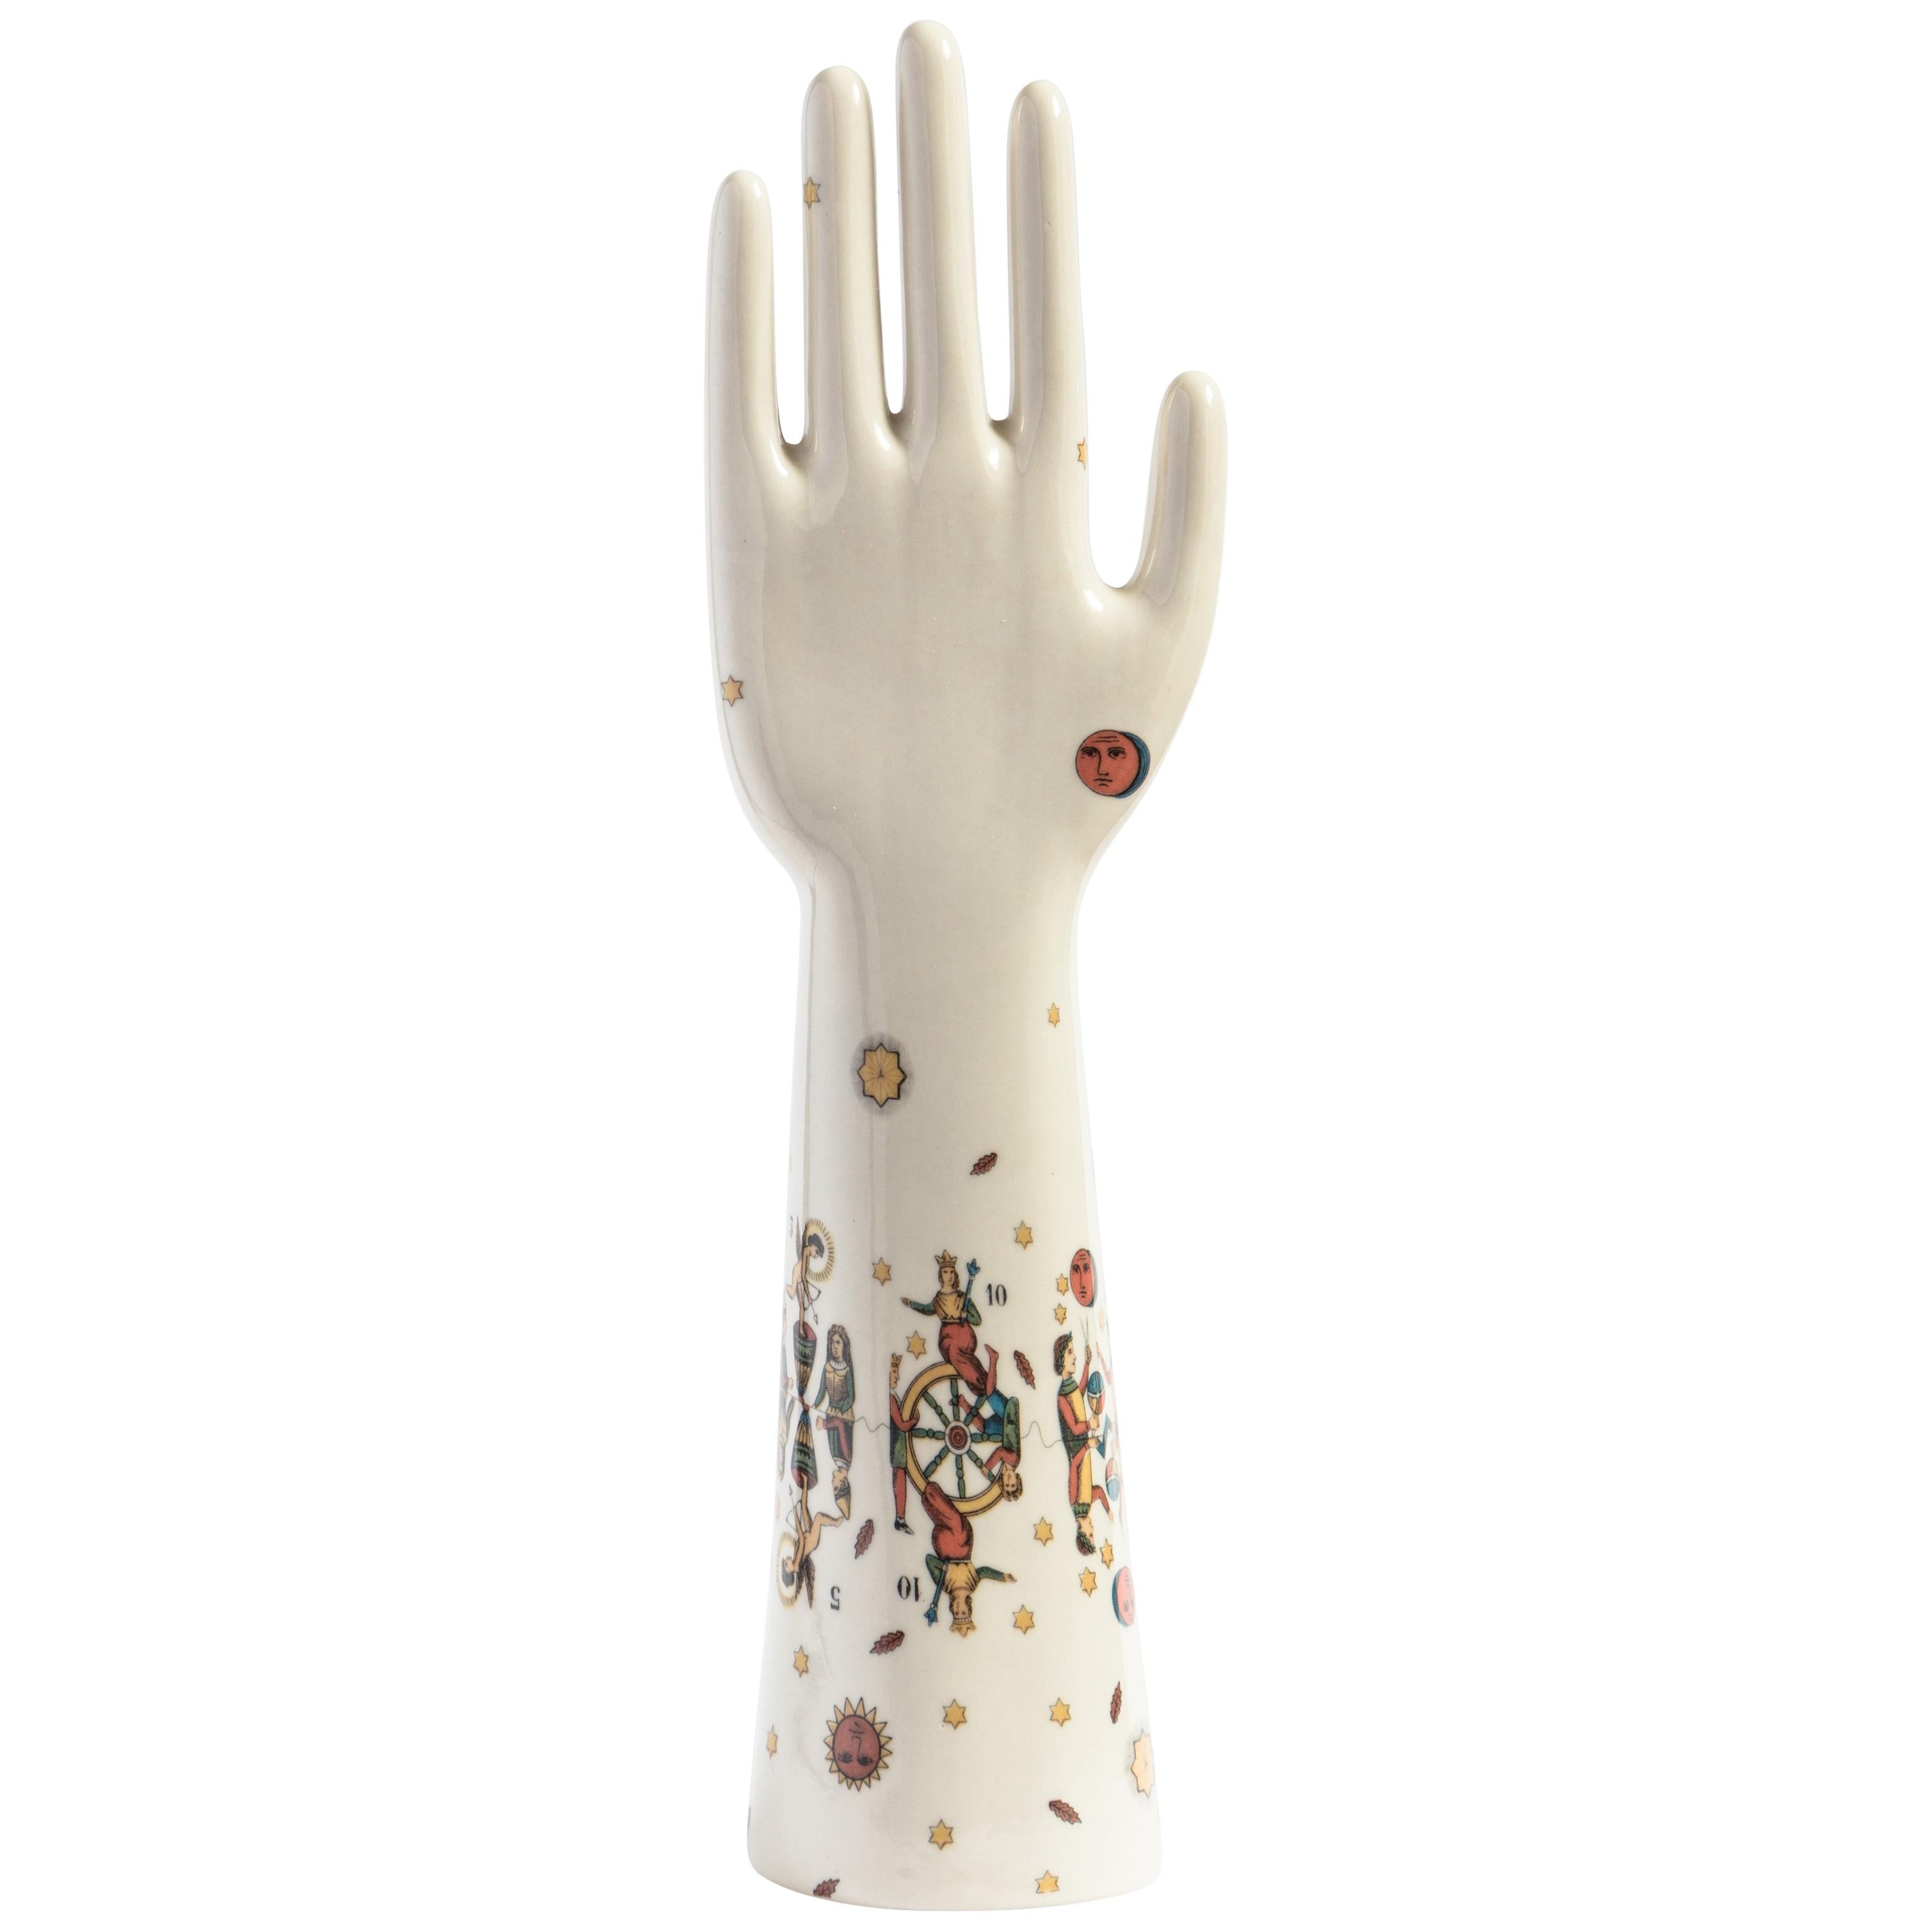 Anatomica, Porcelain Hand with Tarot Cards Decoration by Vito Nesta